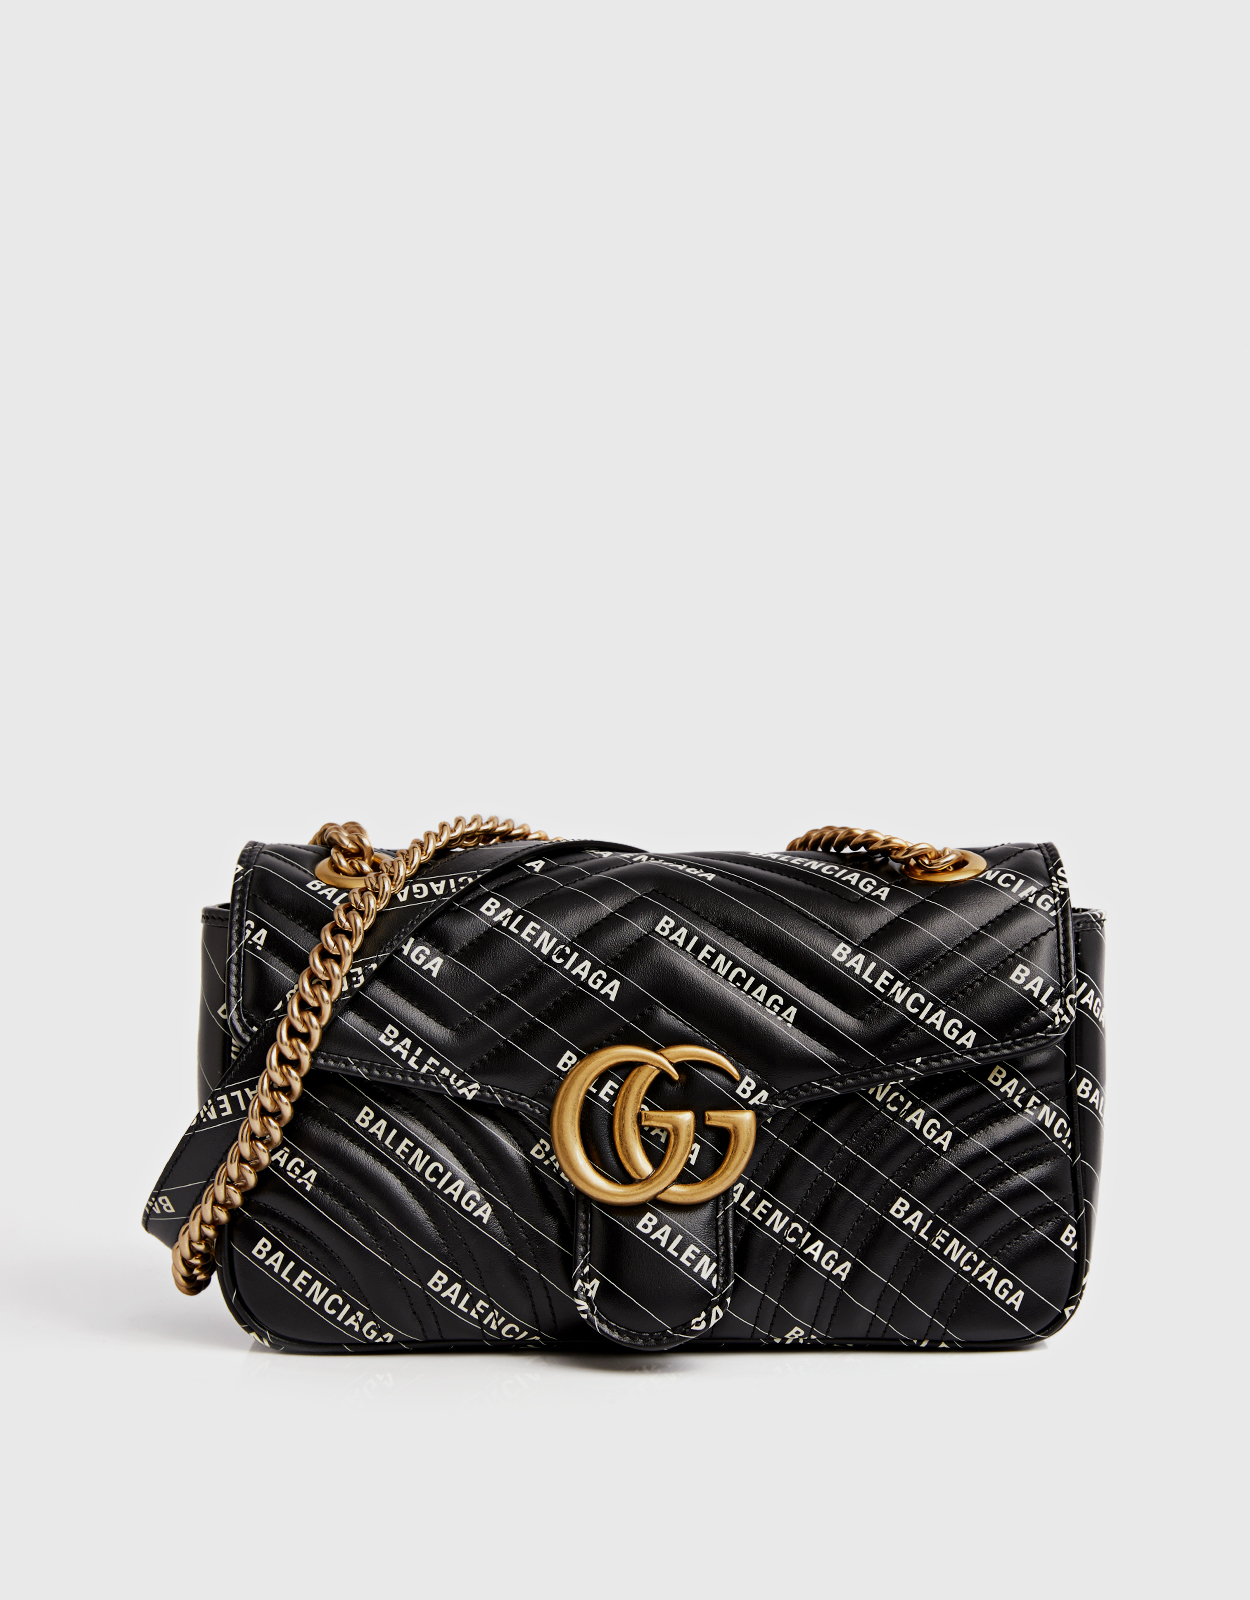 Gucci - The Hacker Project GG Marmont Small Calfskin Shoulder Bag